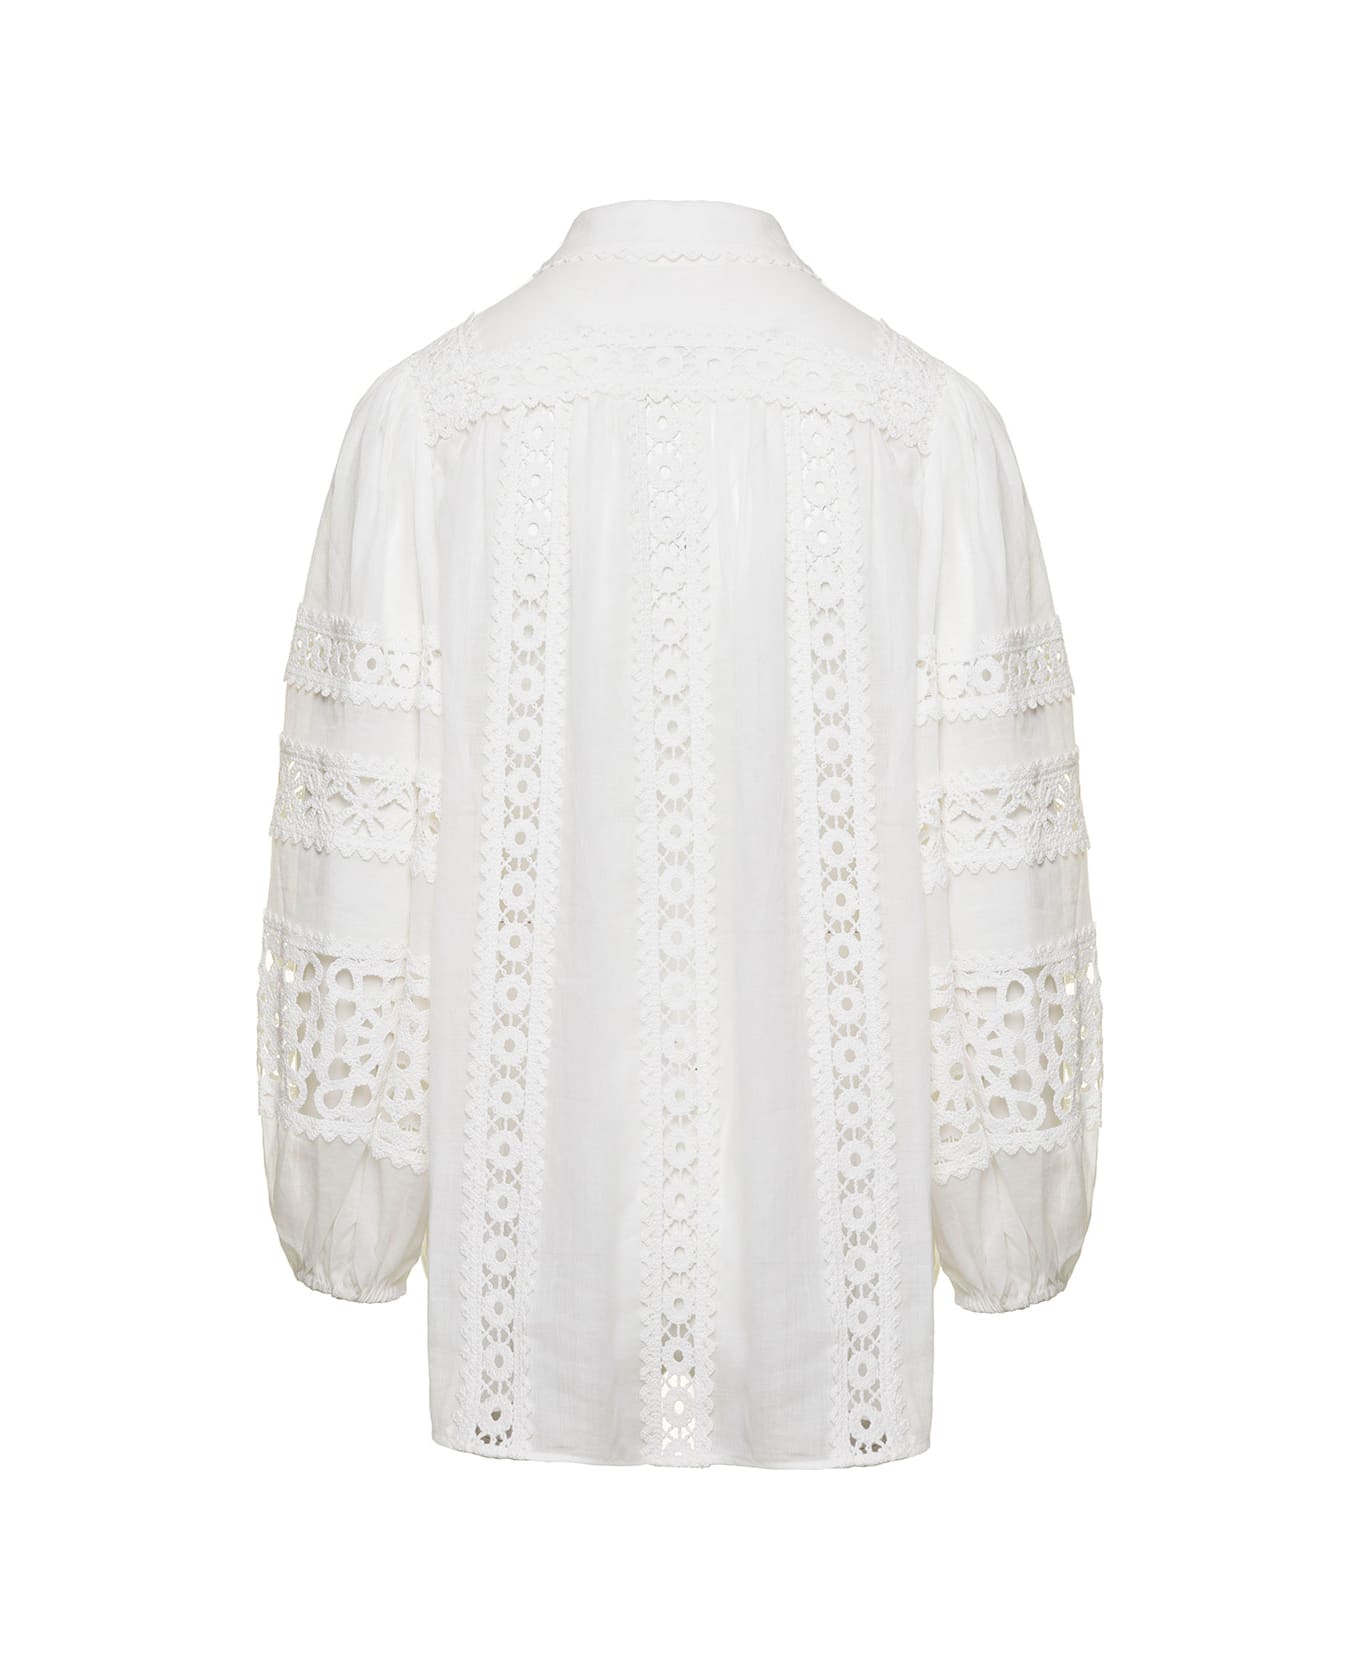 Zimmermann 'devi' White Shirt With Lace Details In Ramie Woman - White